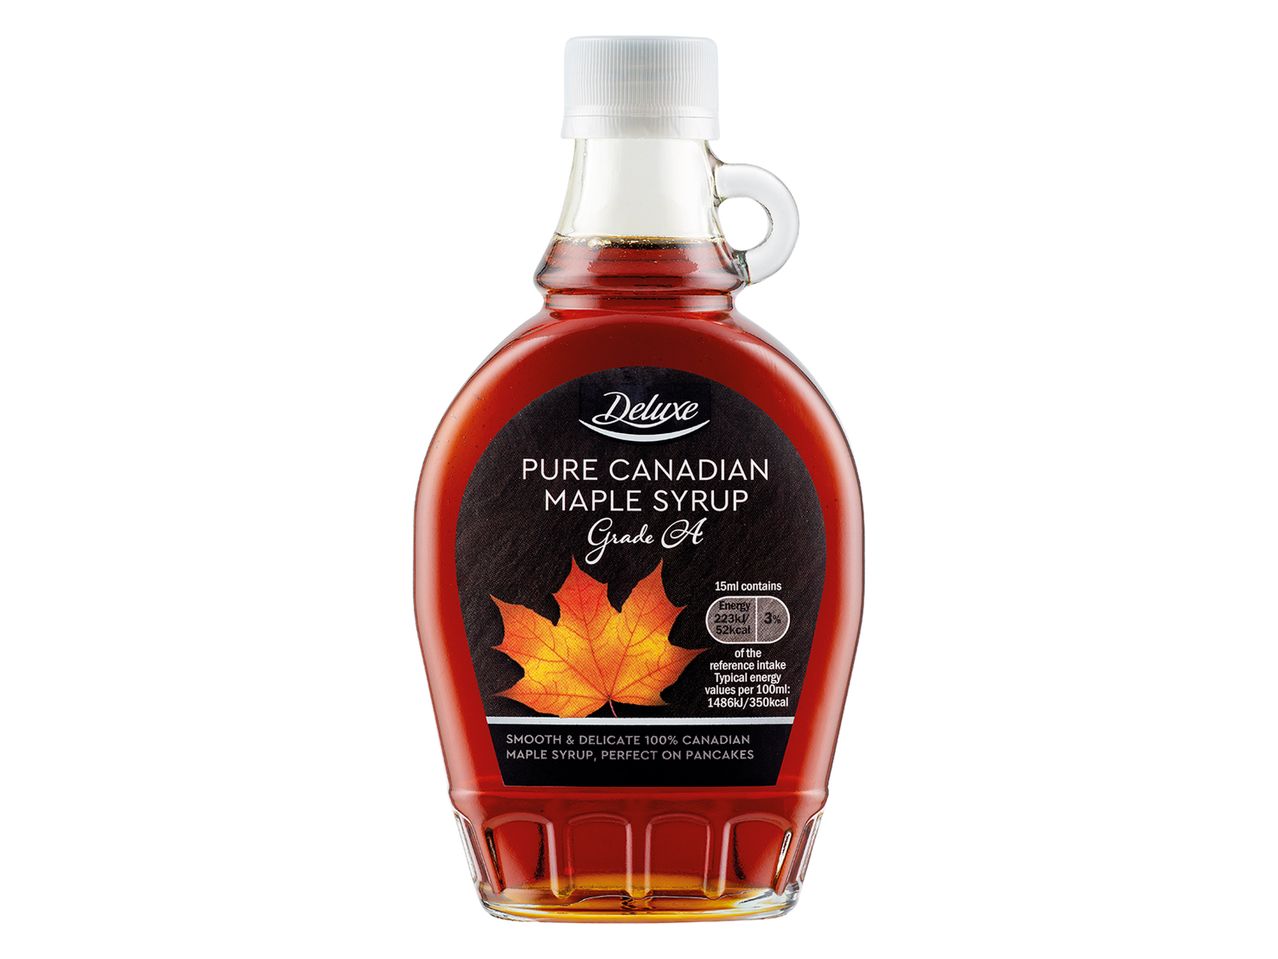 Go to full screen view: Deluxe Pure Canadian Maple Syrup - Image 1